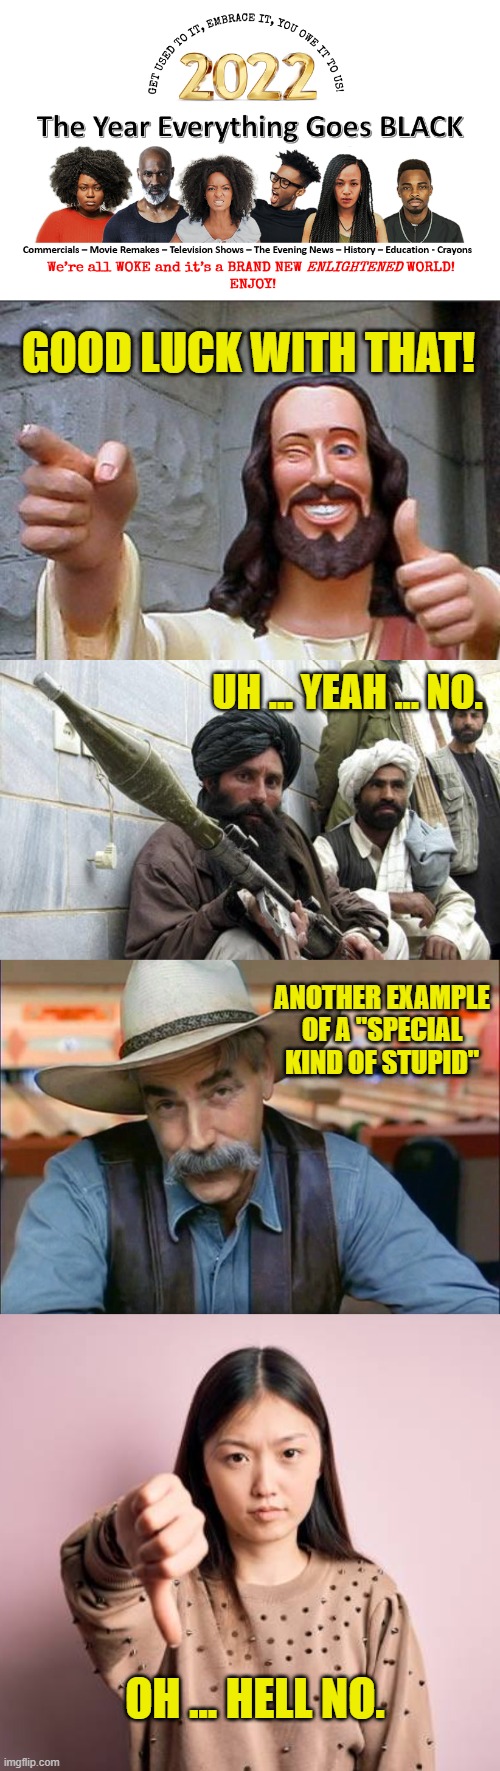 Unrealistic Expectations For 2022 | GOOD LUCK WITH THAT! UH ... YEAH ... NO. ANOTHER EXAMPLE OF A "SPECIAL KIND OF STUPID"; OH ... HELL NO. | image tagged in sam elliott special kind of stupid,asians,joe biden,blm,2022,radical islam | made w/ Imgflip meme maker